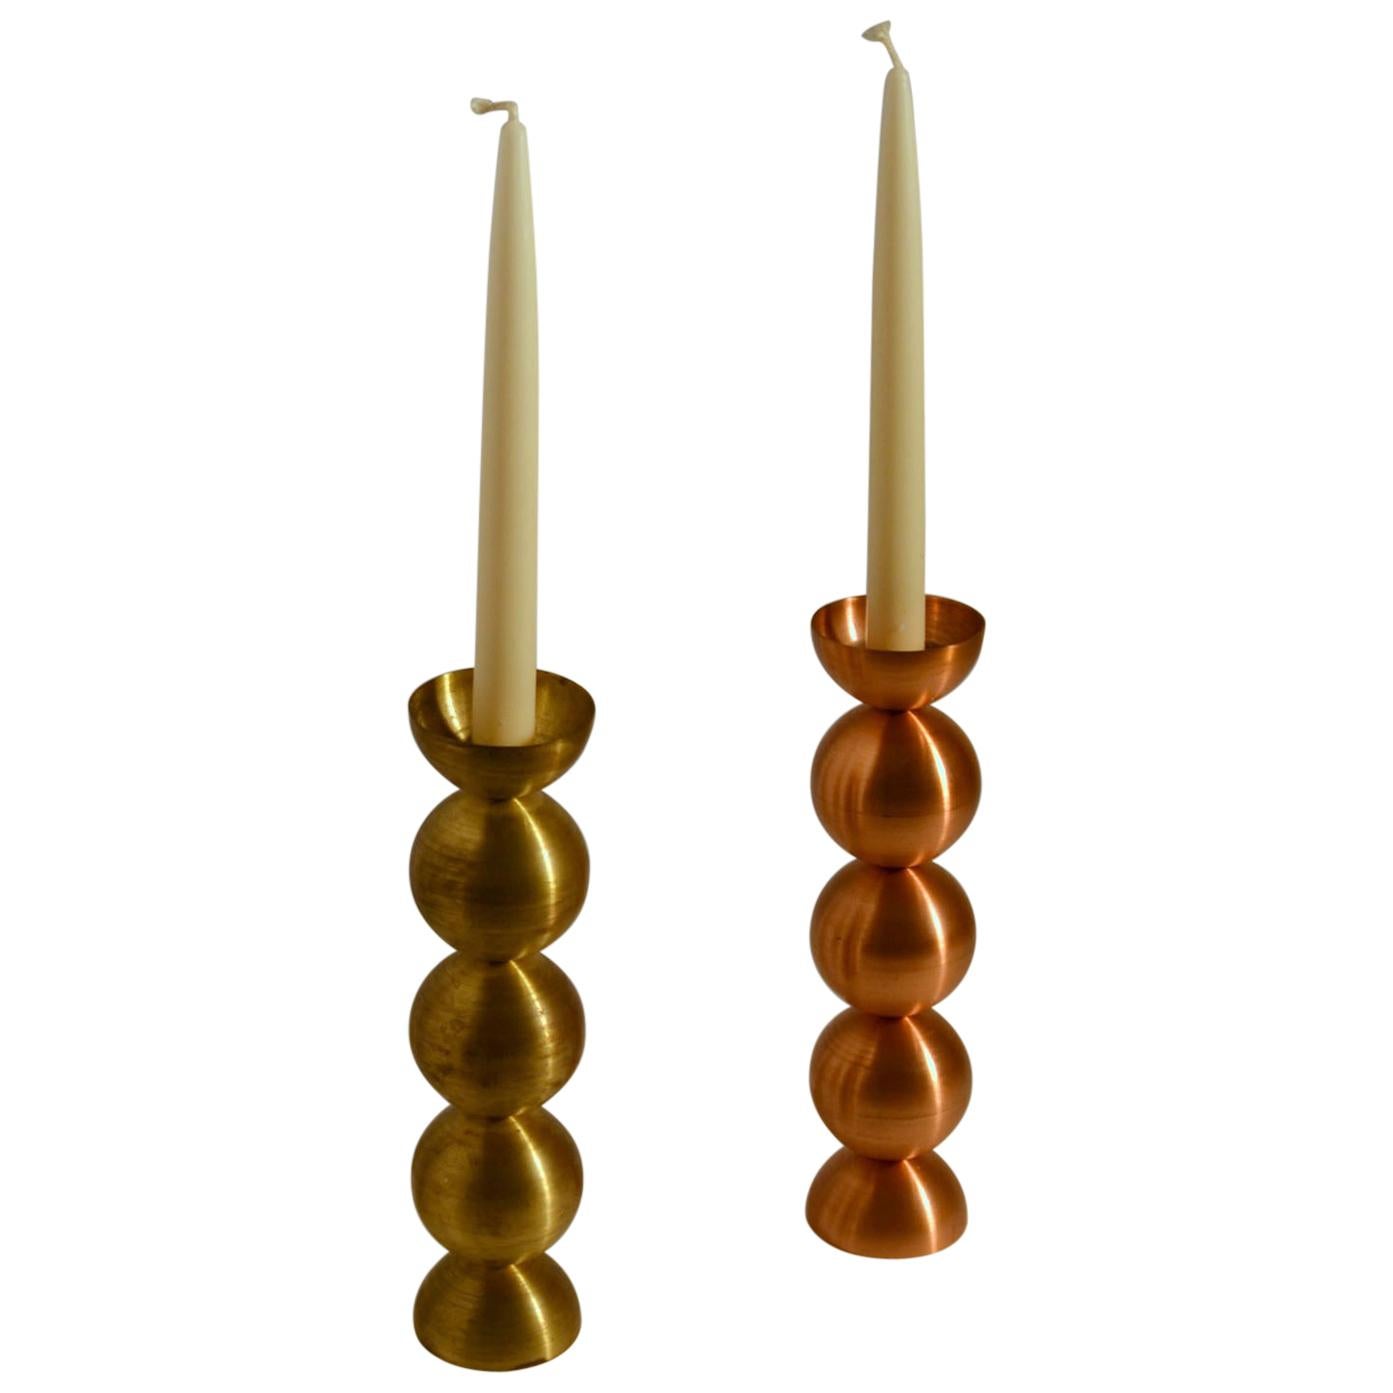 Pair of Candle Holders in Brass and Copper